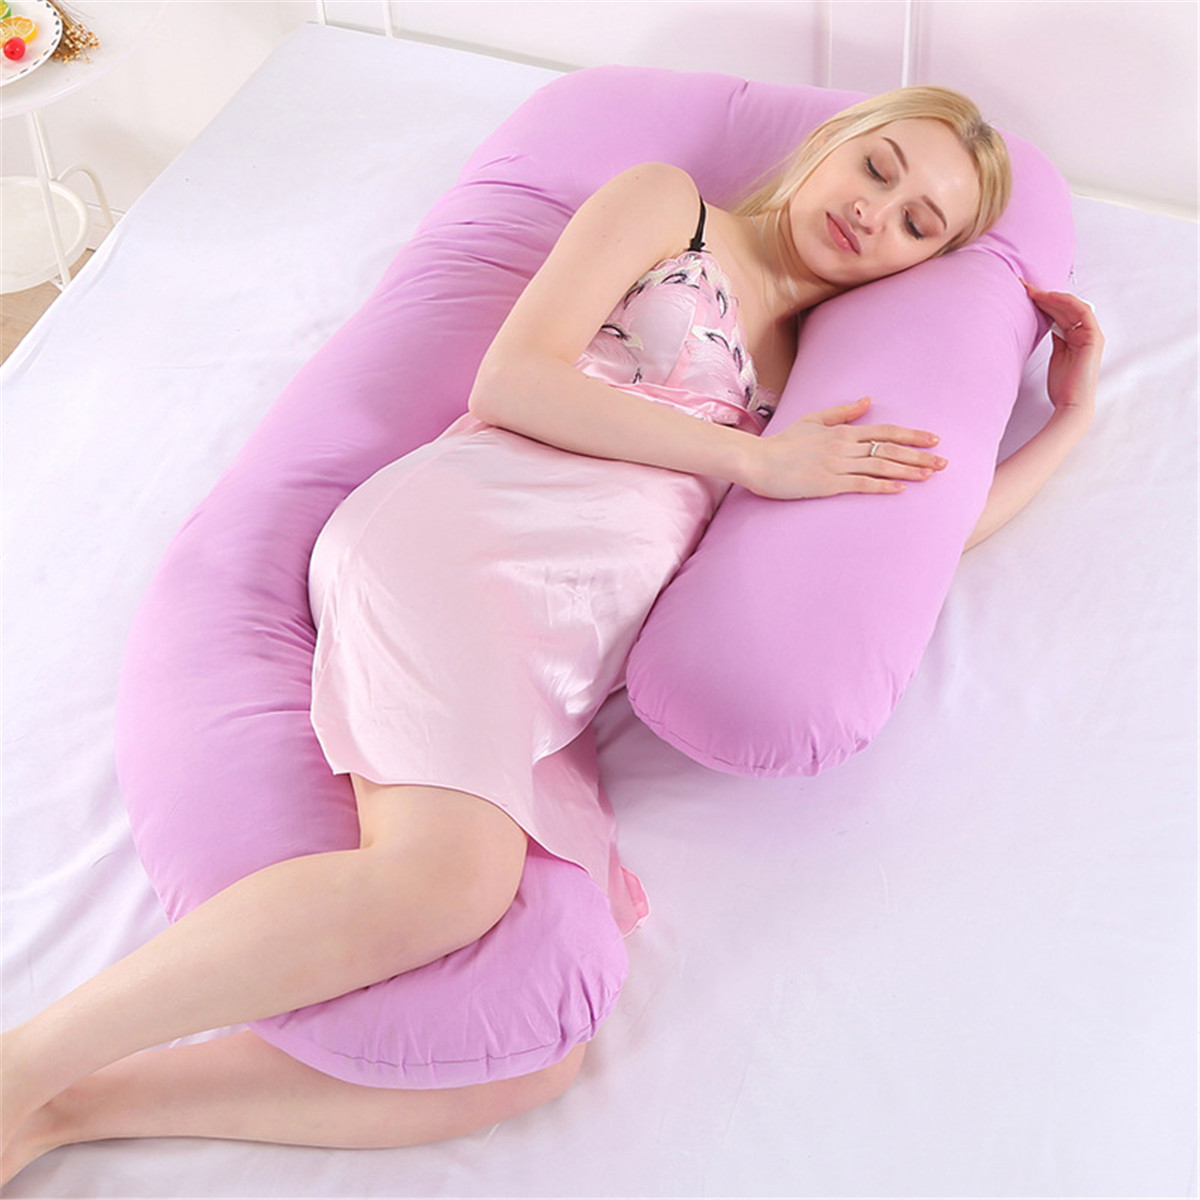 Multi-functional-Mother-Pillow-Side-Sleeper-Pure-Cotton-Removable-Washable-U-shaped-Napping-Pillowca-1809583-11